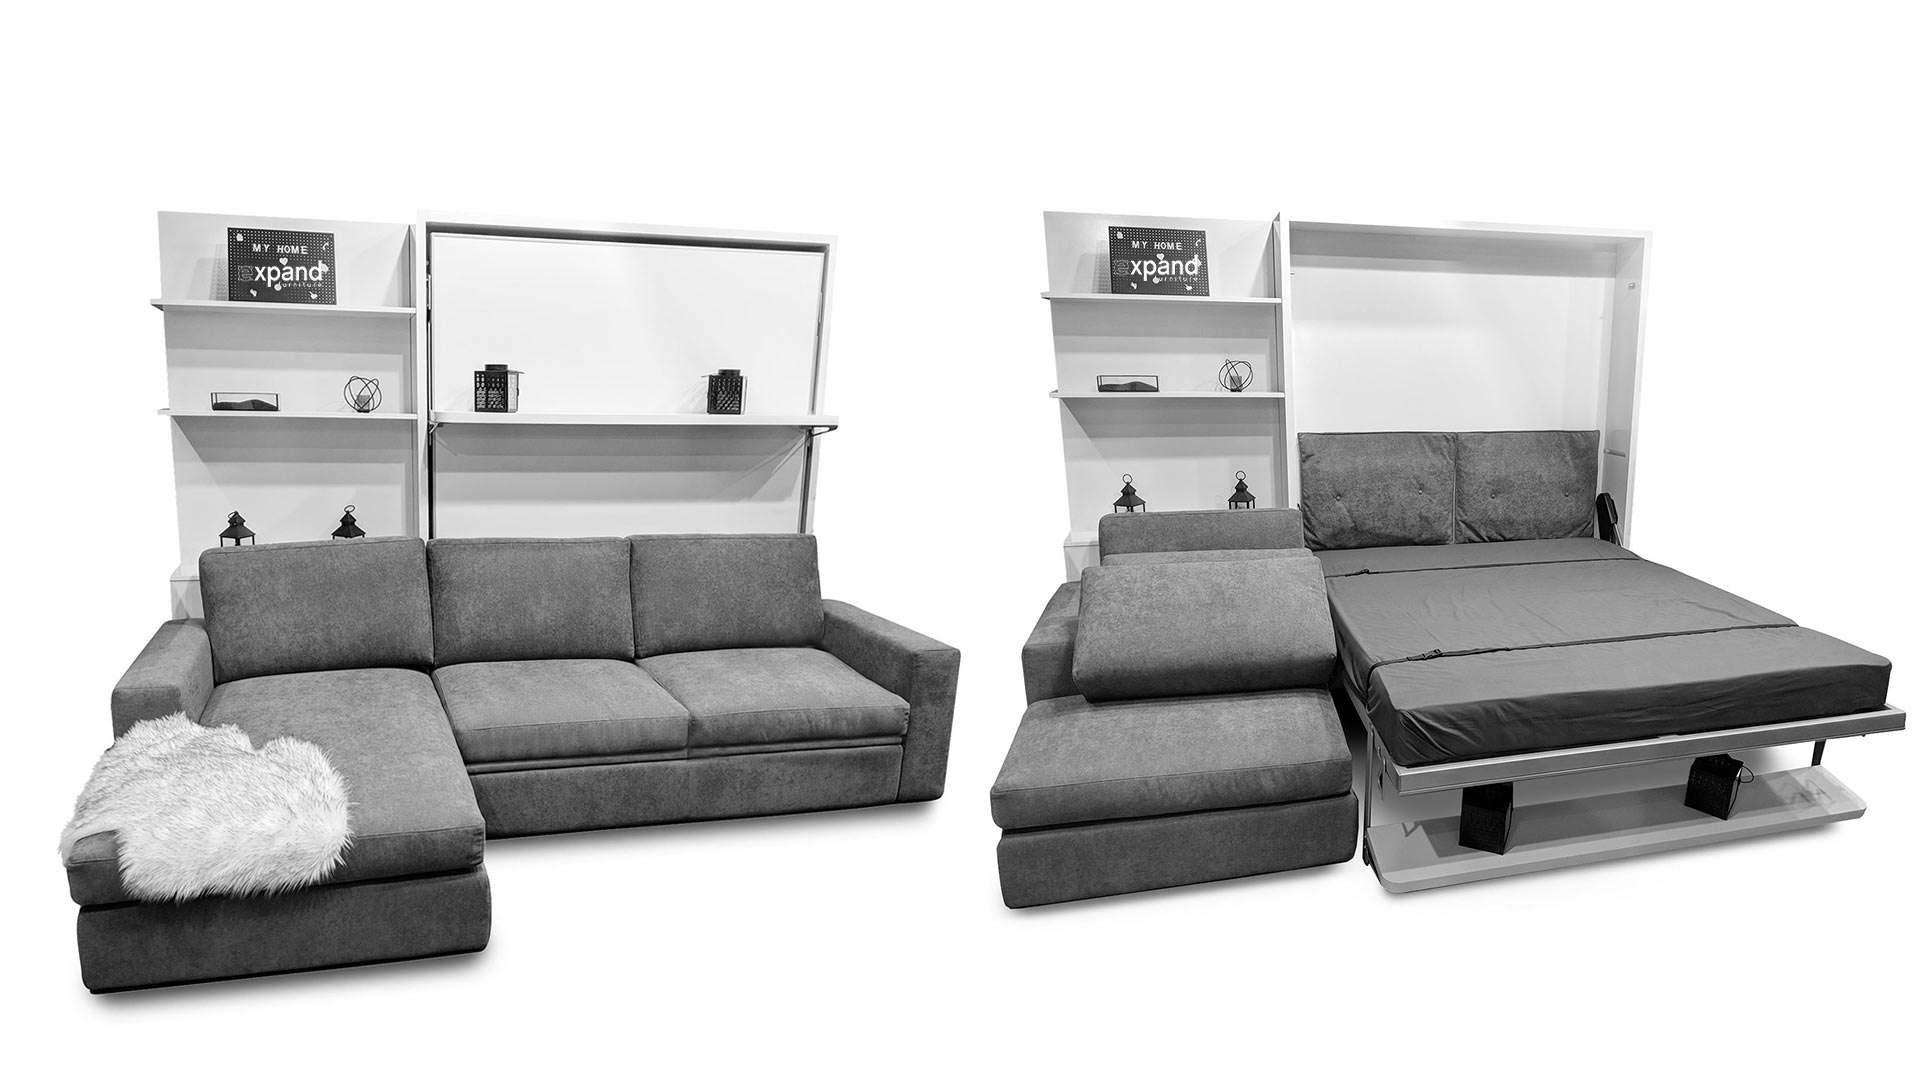 project plans for sofa beds